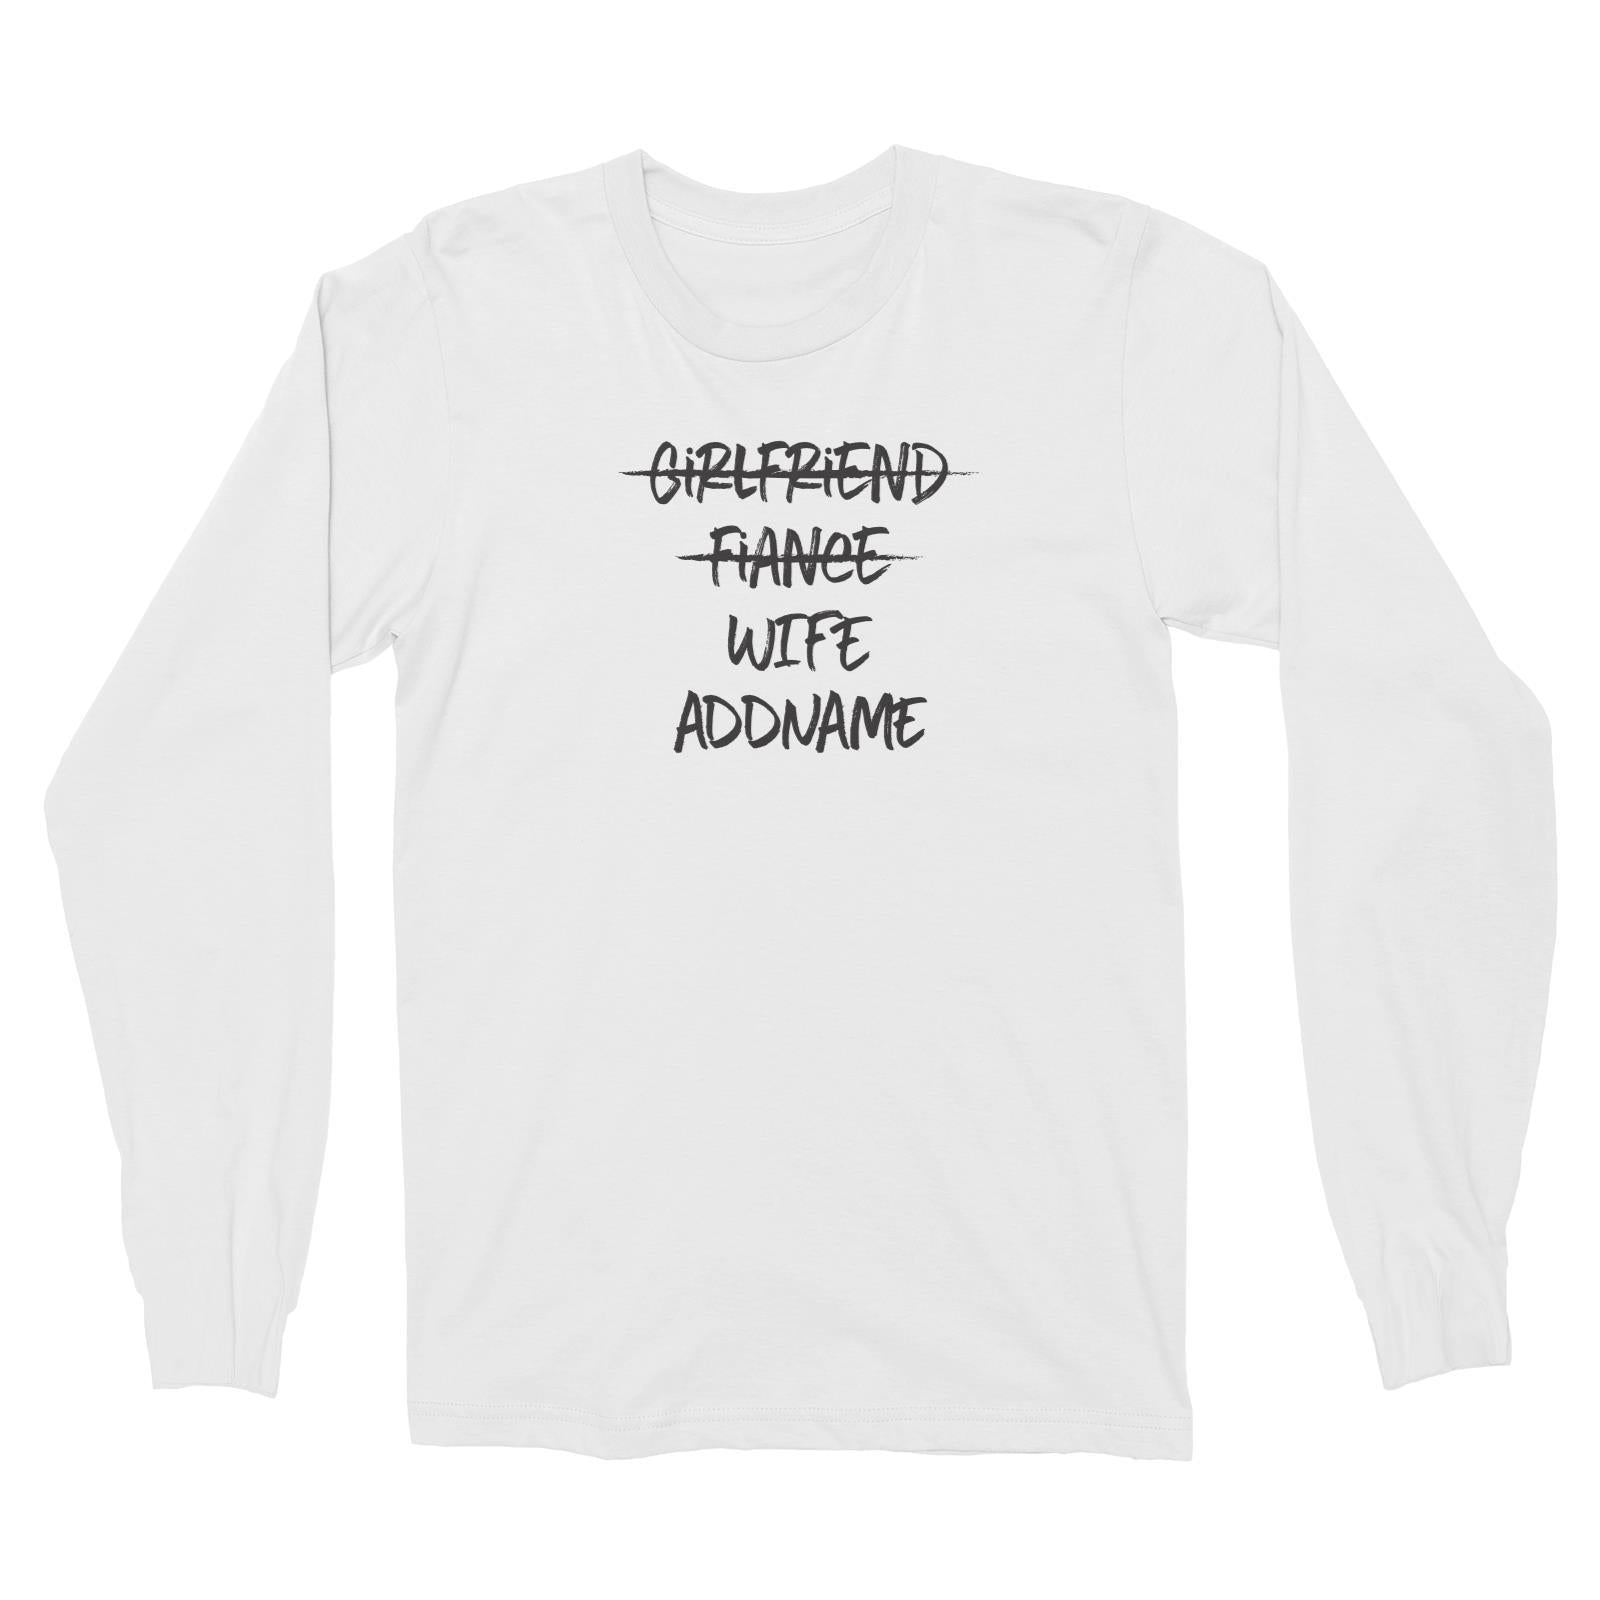 Husband and Wife Girlfriend Fiance Wife Addname Long Sleeve Unisex T-Shirt